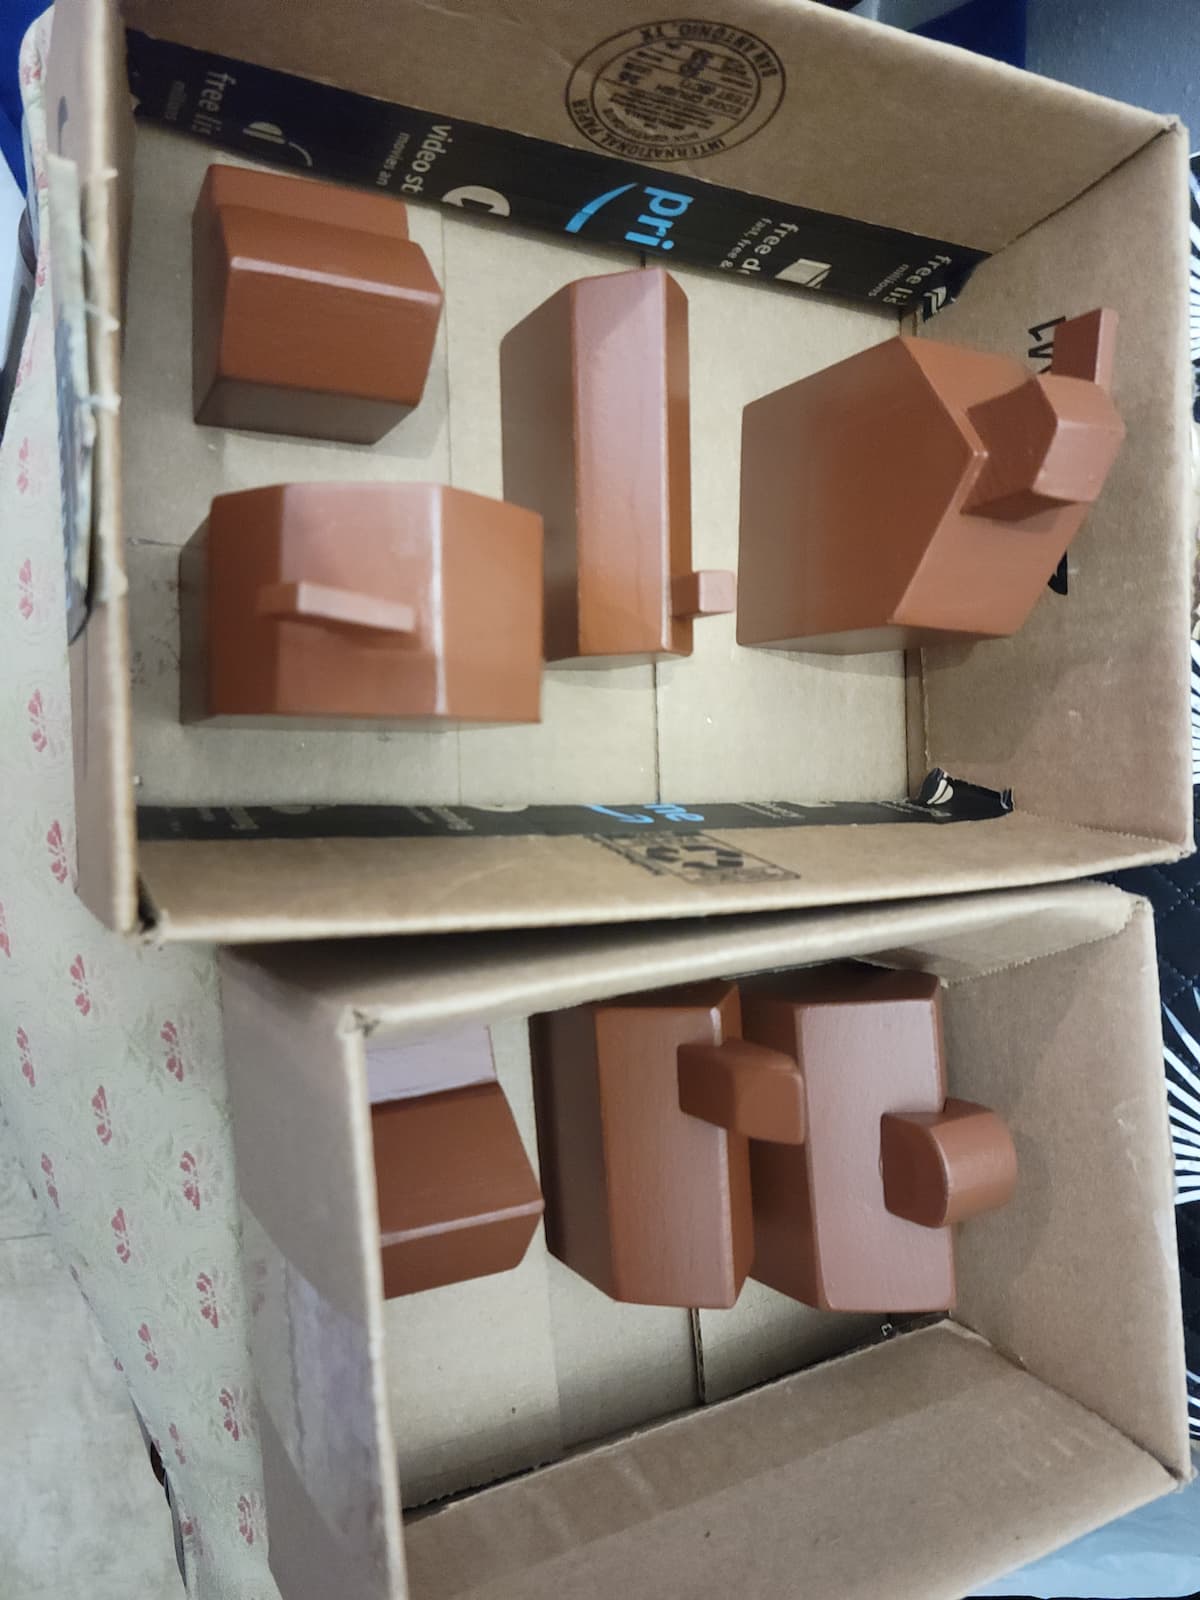 Wood Block Houses with base coat of gingerbread brown